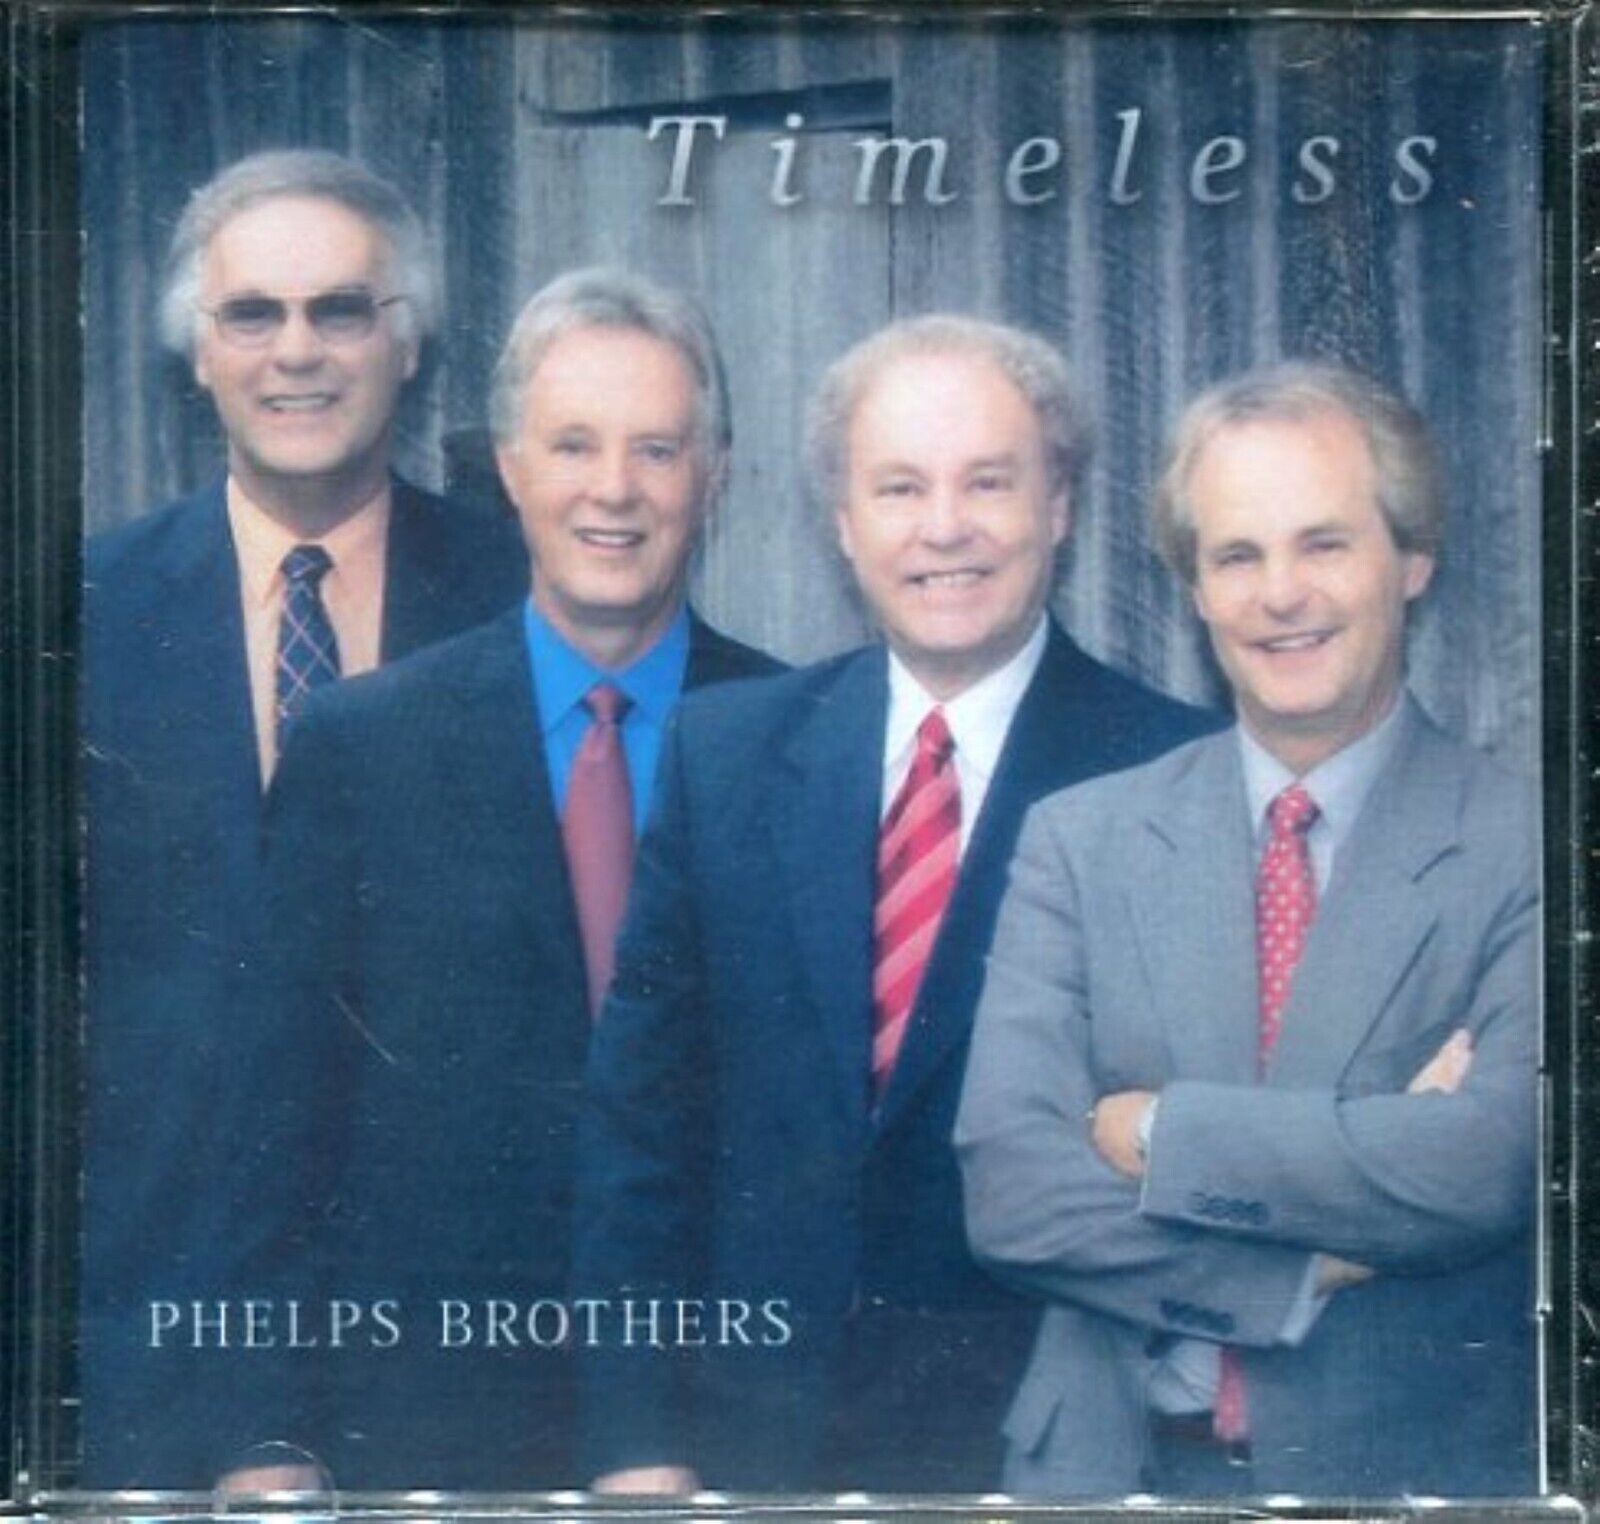 PHELPS BROTHERS - TIMELESS -AUDIO CD